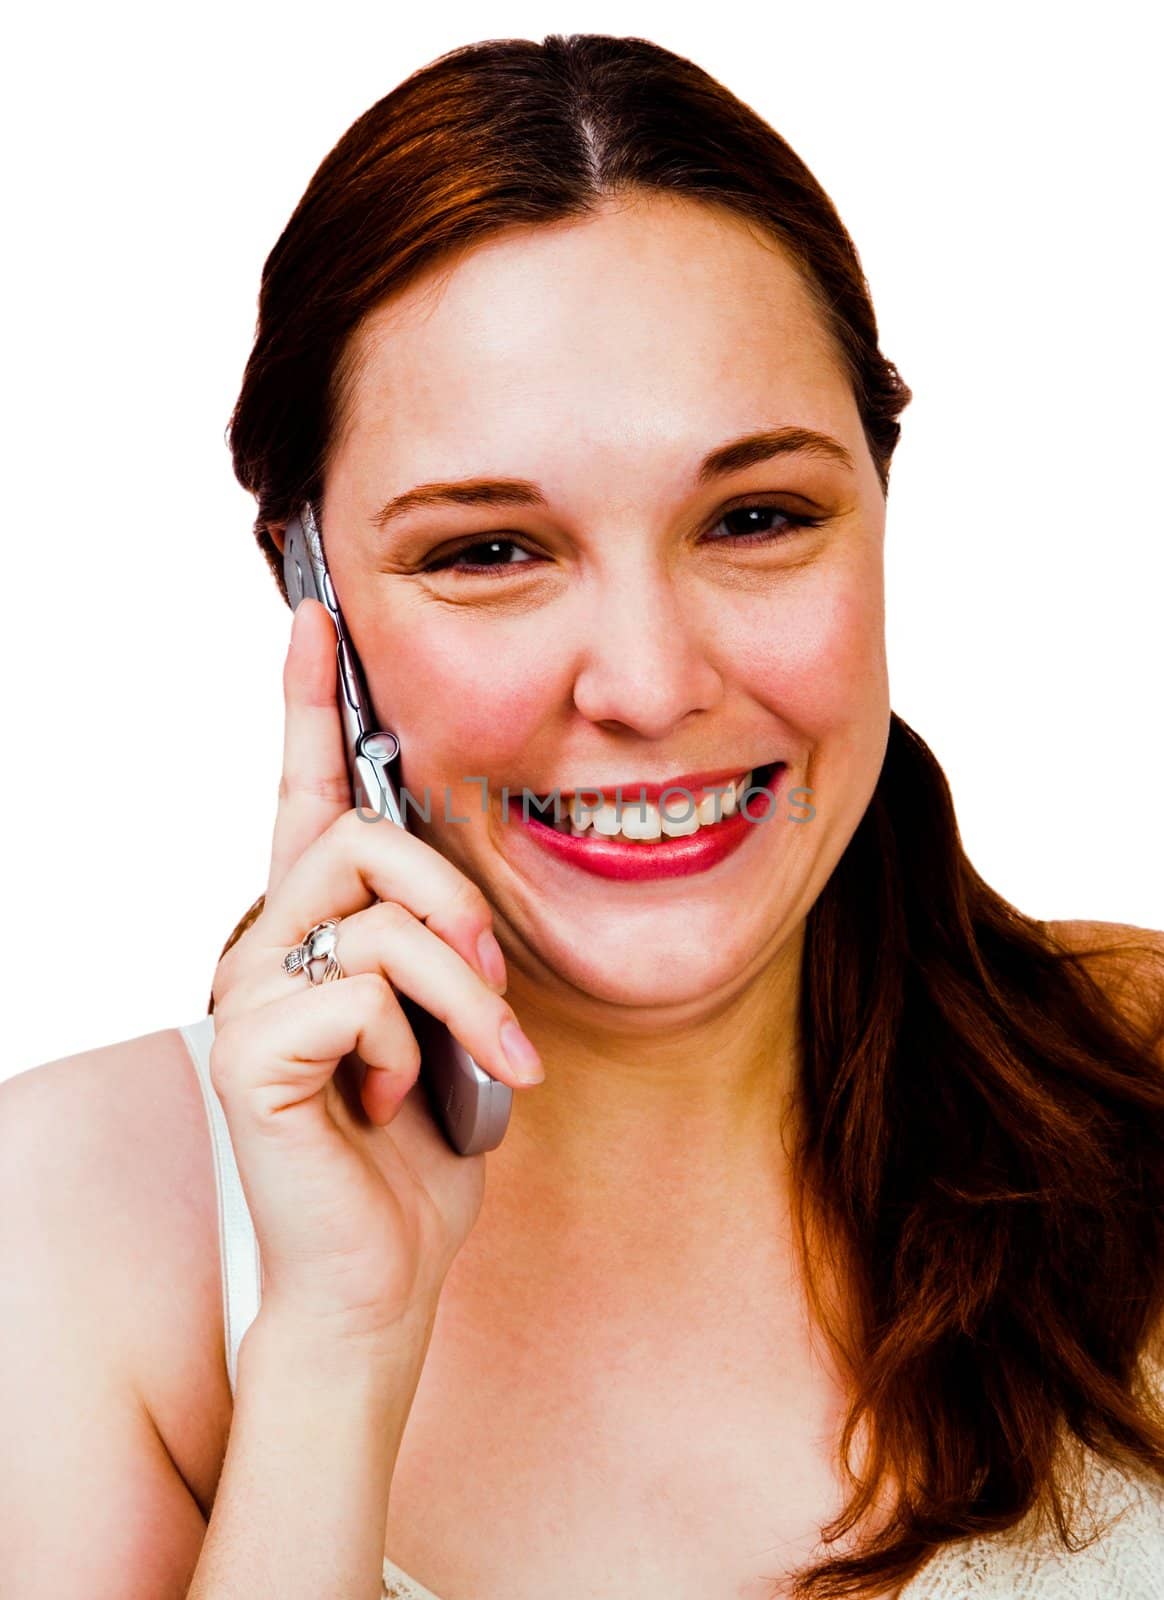 Close-up of a woman talking on a mobile phone isolated over white